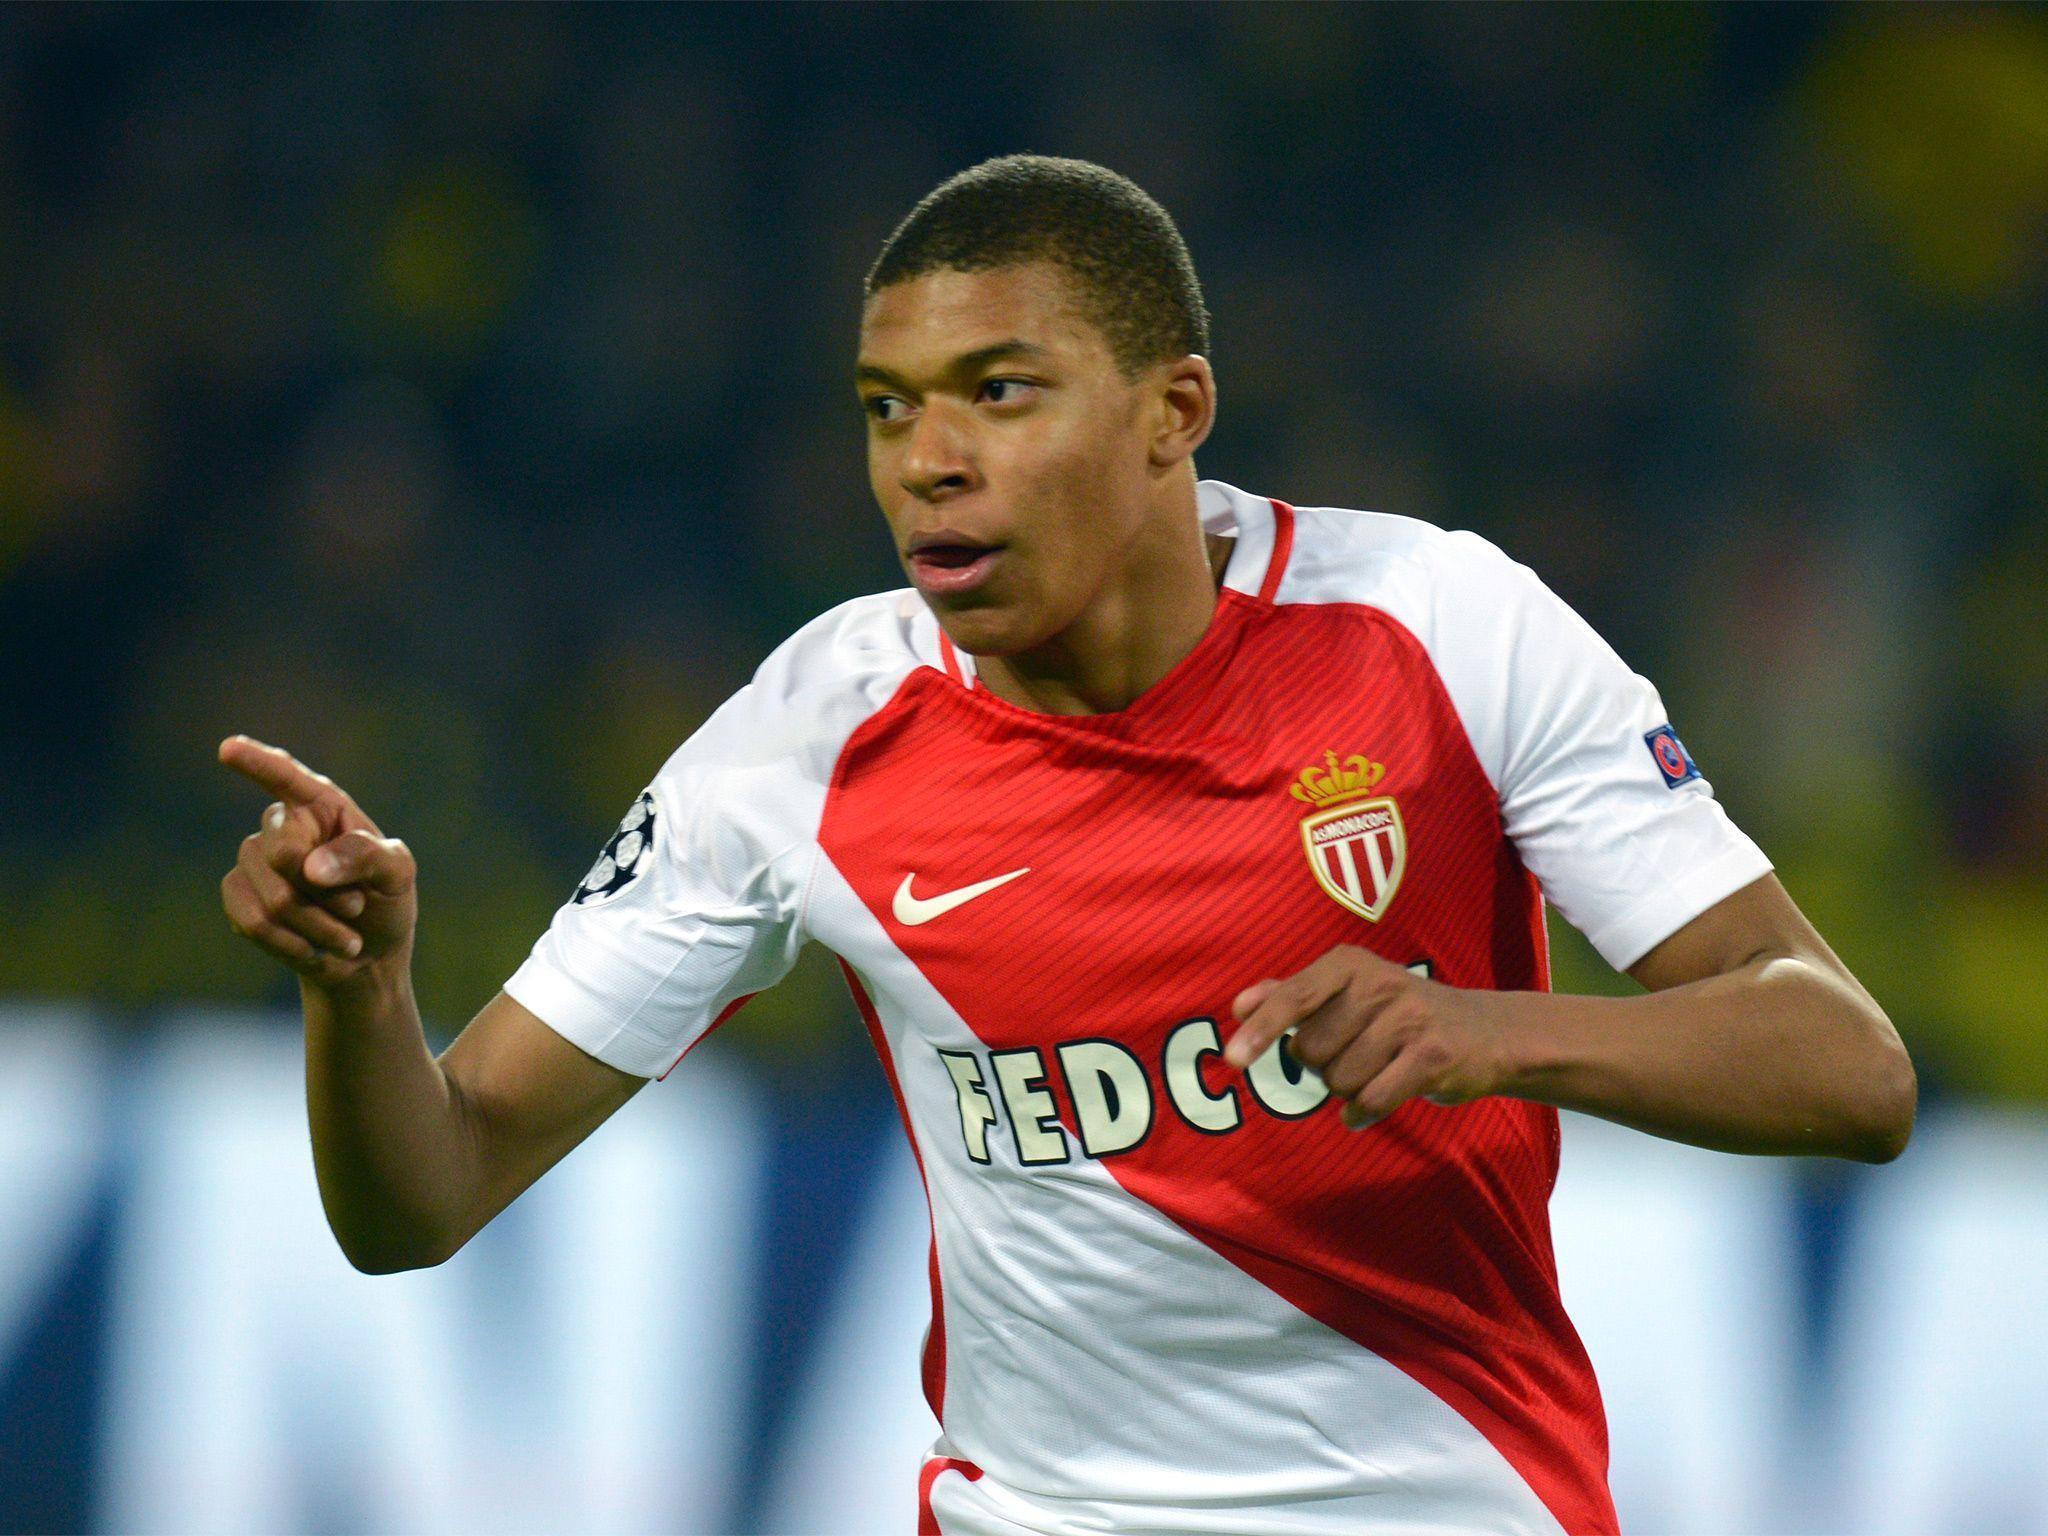 Chelsea 'turned down chance' to sign Monaco's Kylian Mbappe for